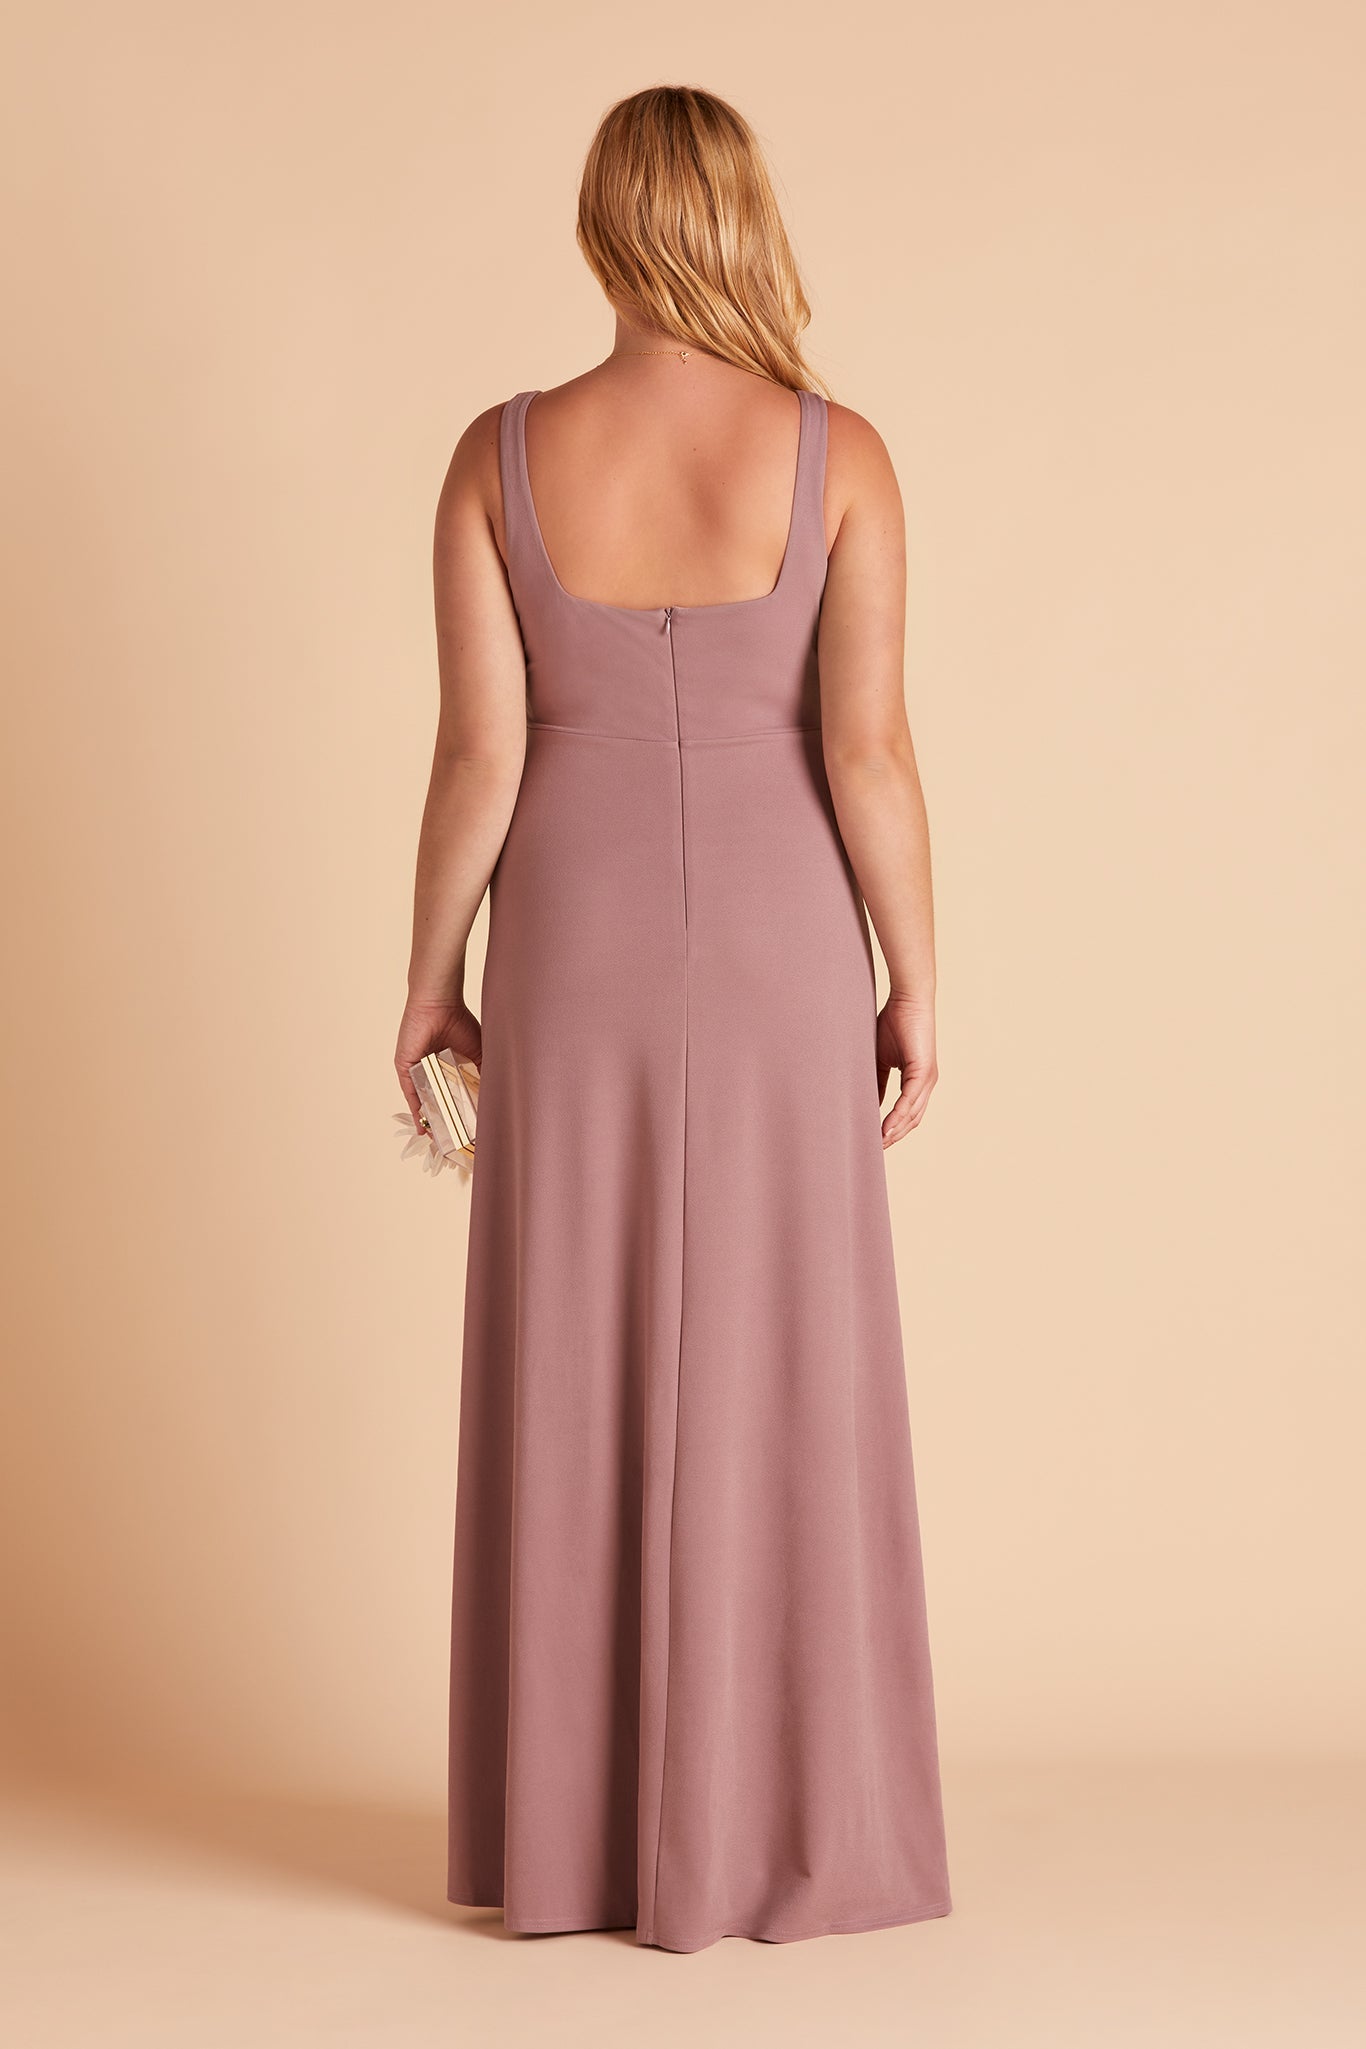 Alex convertible plus size bridesmaid dress with slit in dark mauve crepe by Birdy Grey, back view